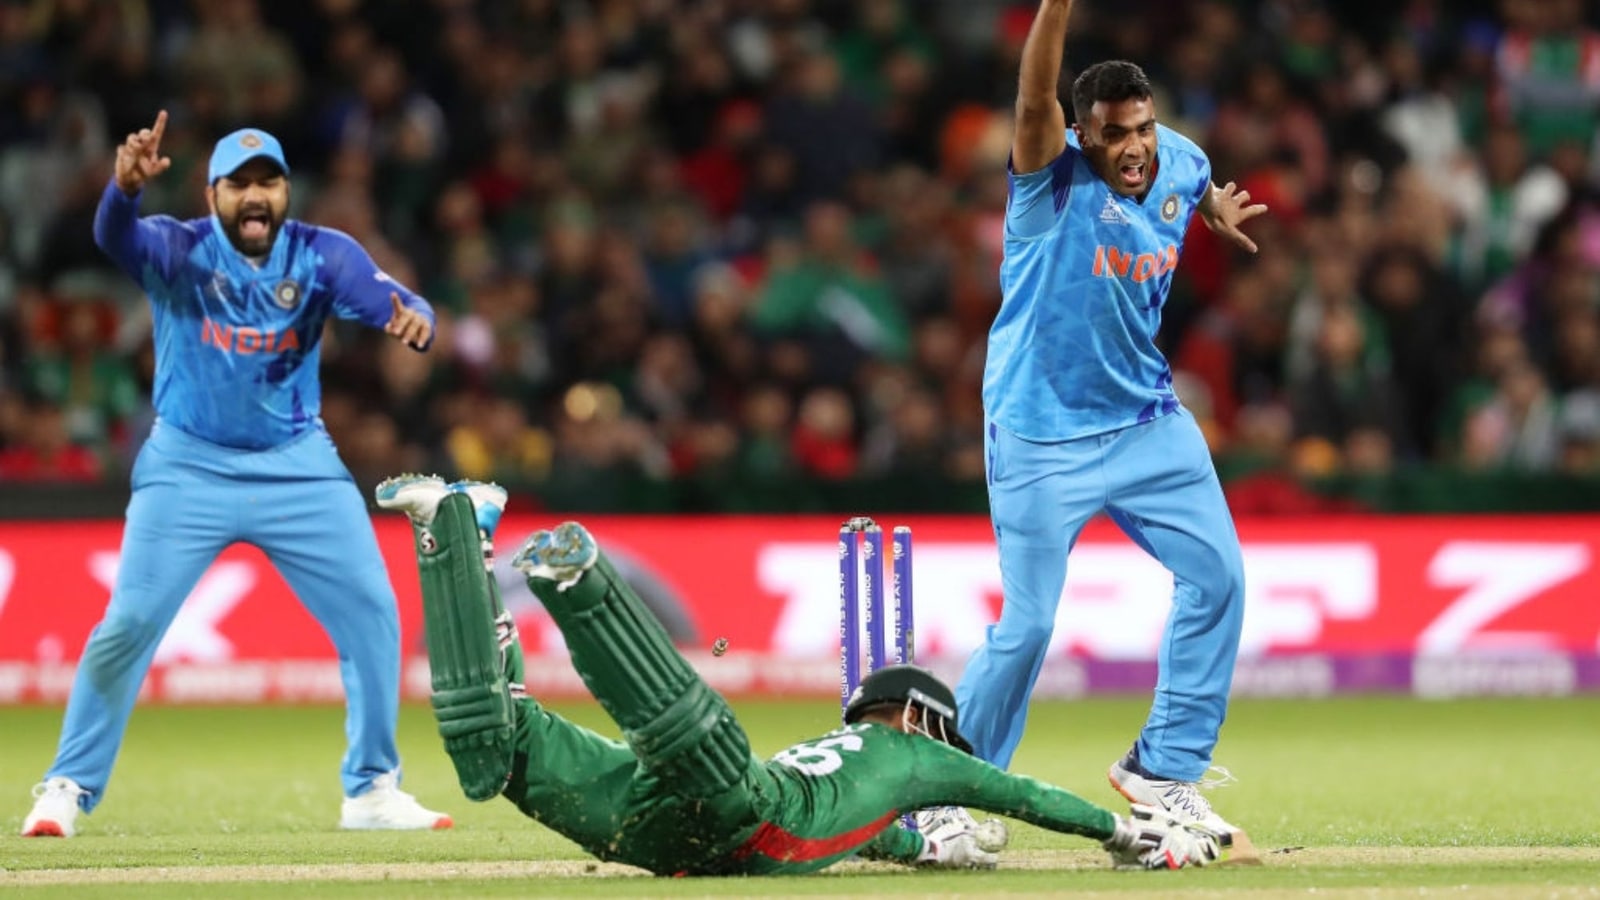 india-vs-bangladesh-t20-world-cup-2022-twitter-goes-chirpy-as-virat-kohli-leads-india-to-a-nail-biting-win